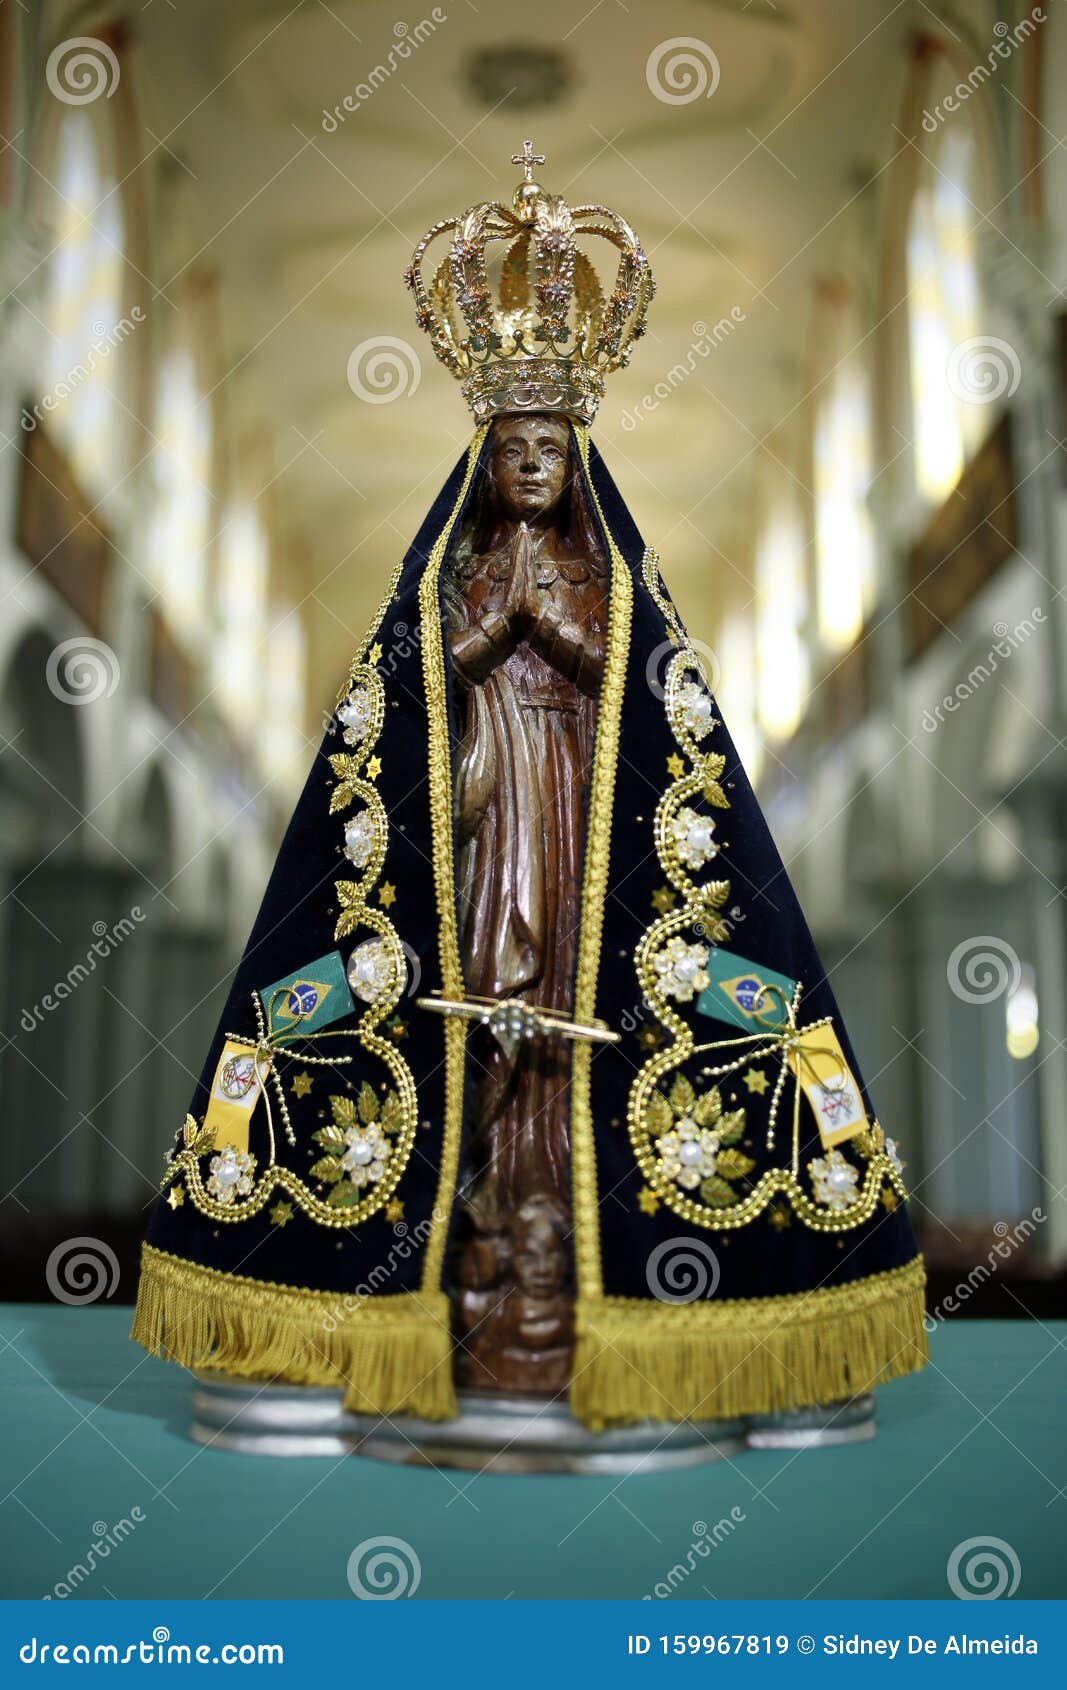 image of our lady of aparecida - statue of the image of our lady of aparecida